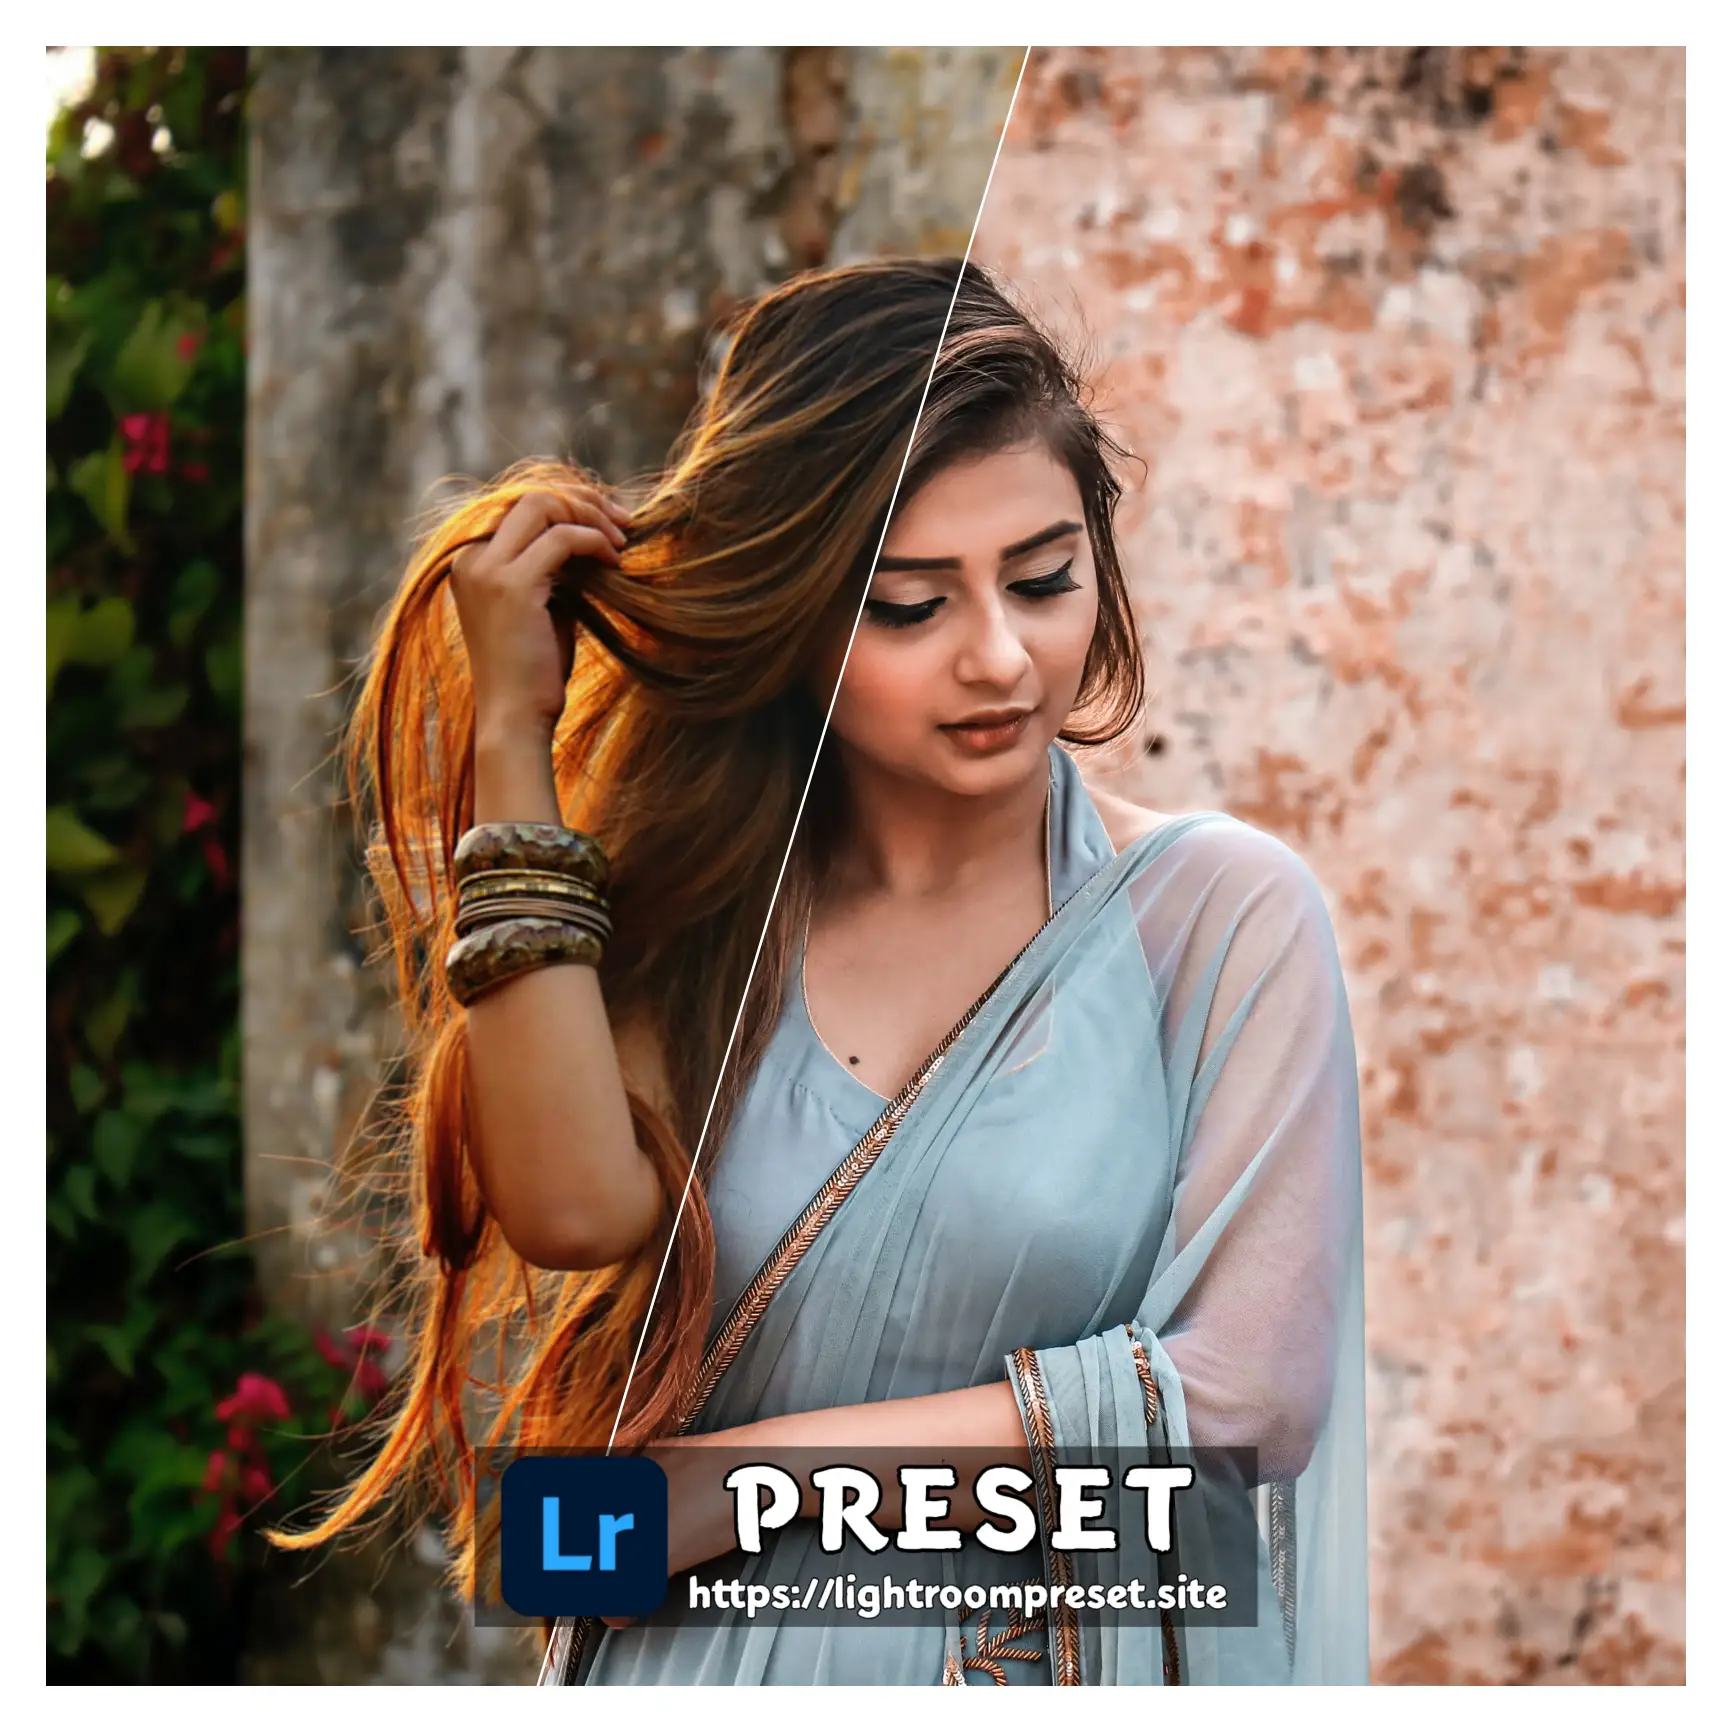 You are currently viewing Western lightroom presets download free